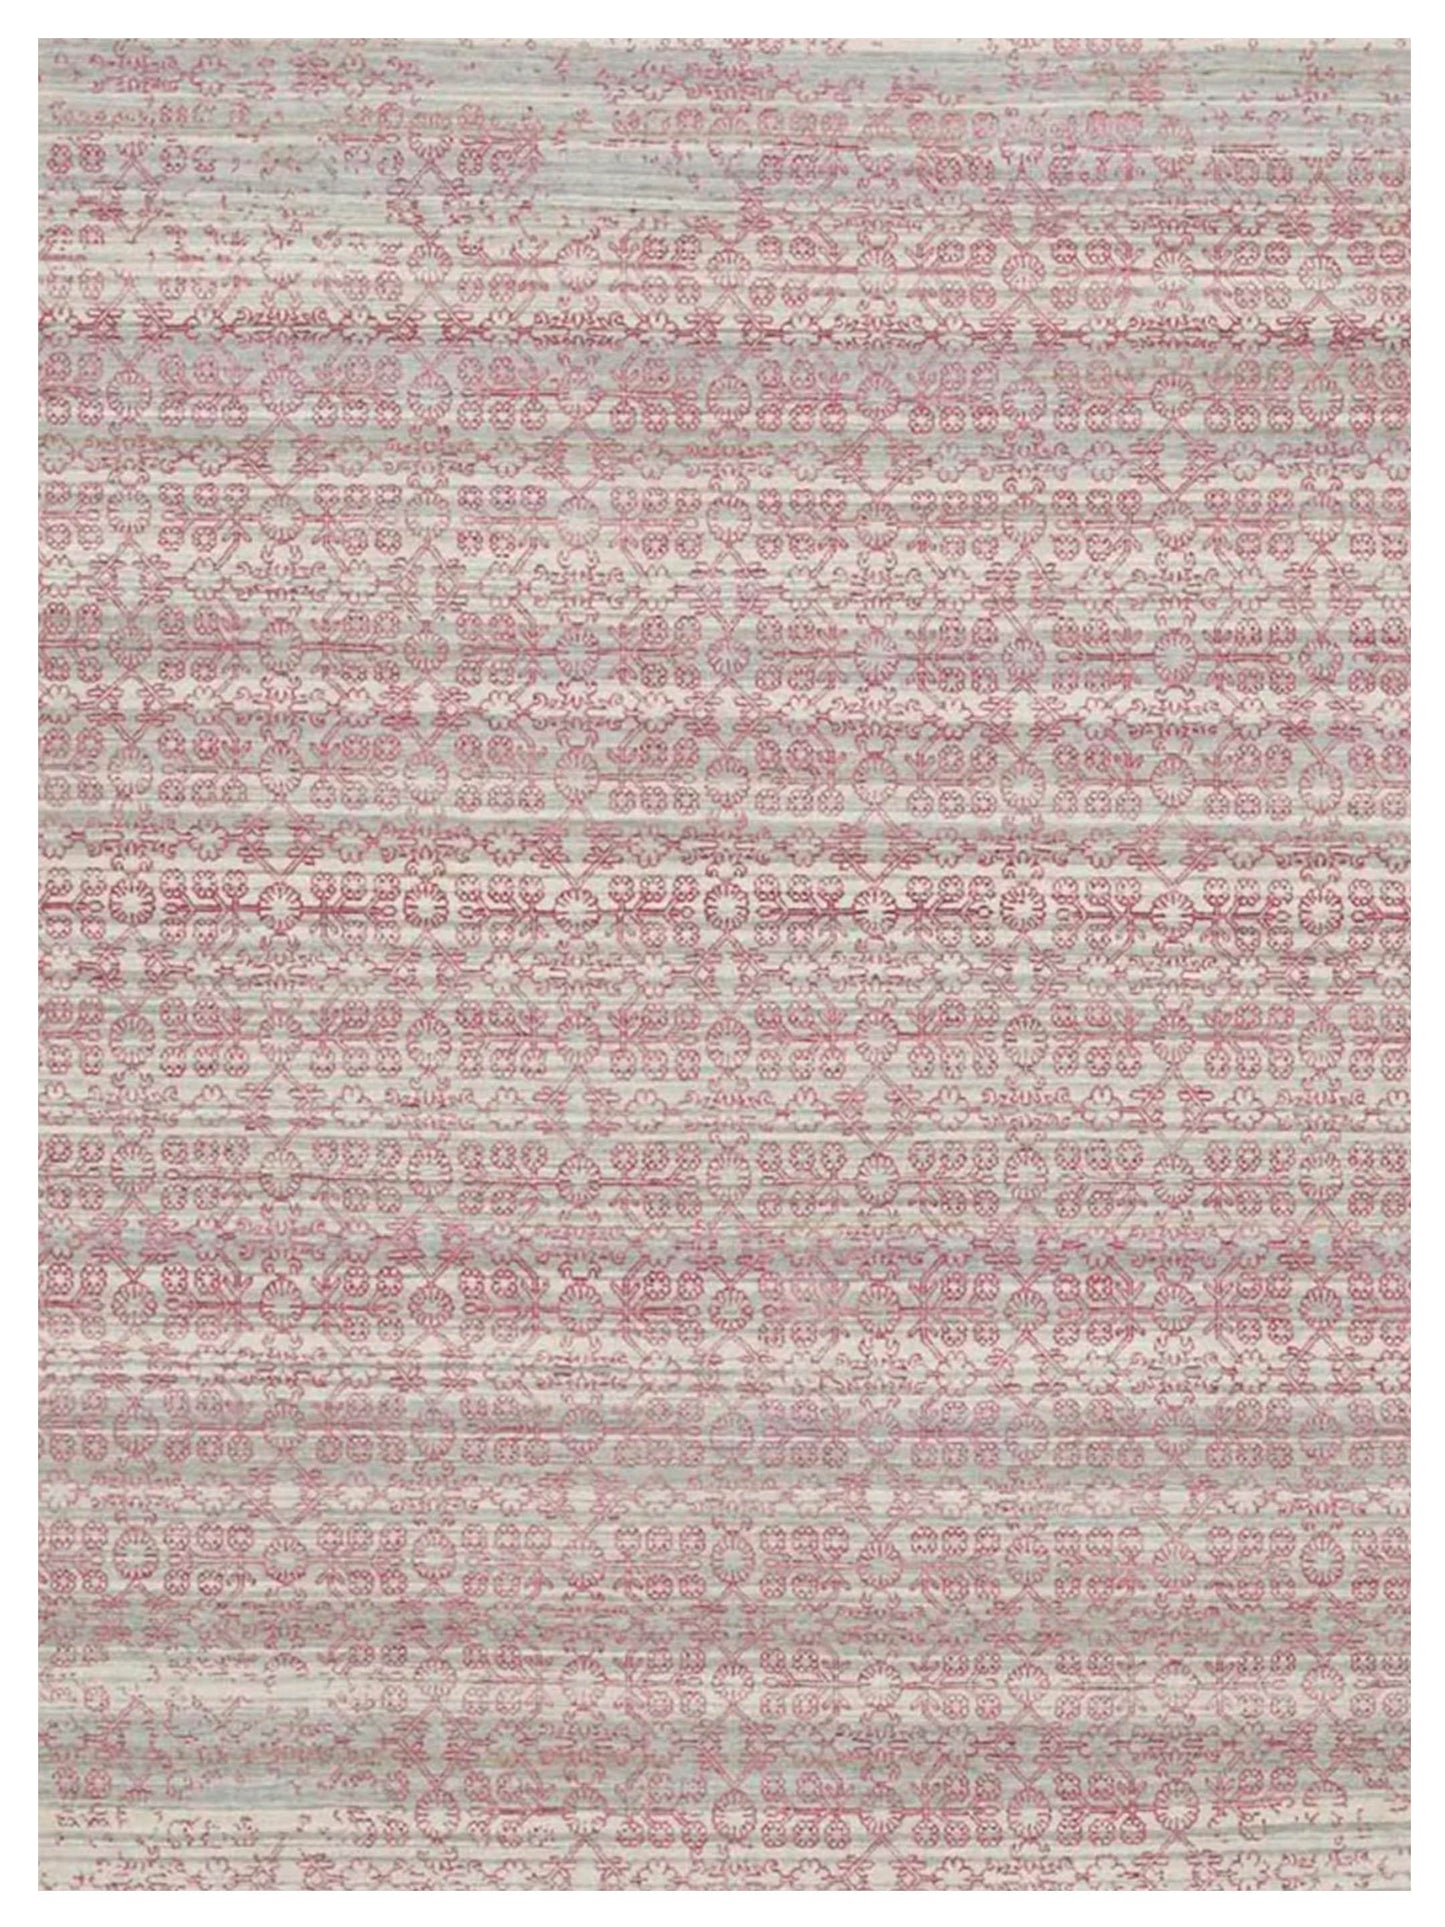 Limited PARKES PA-573 Ivory  Transitional Knotted Rug